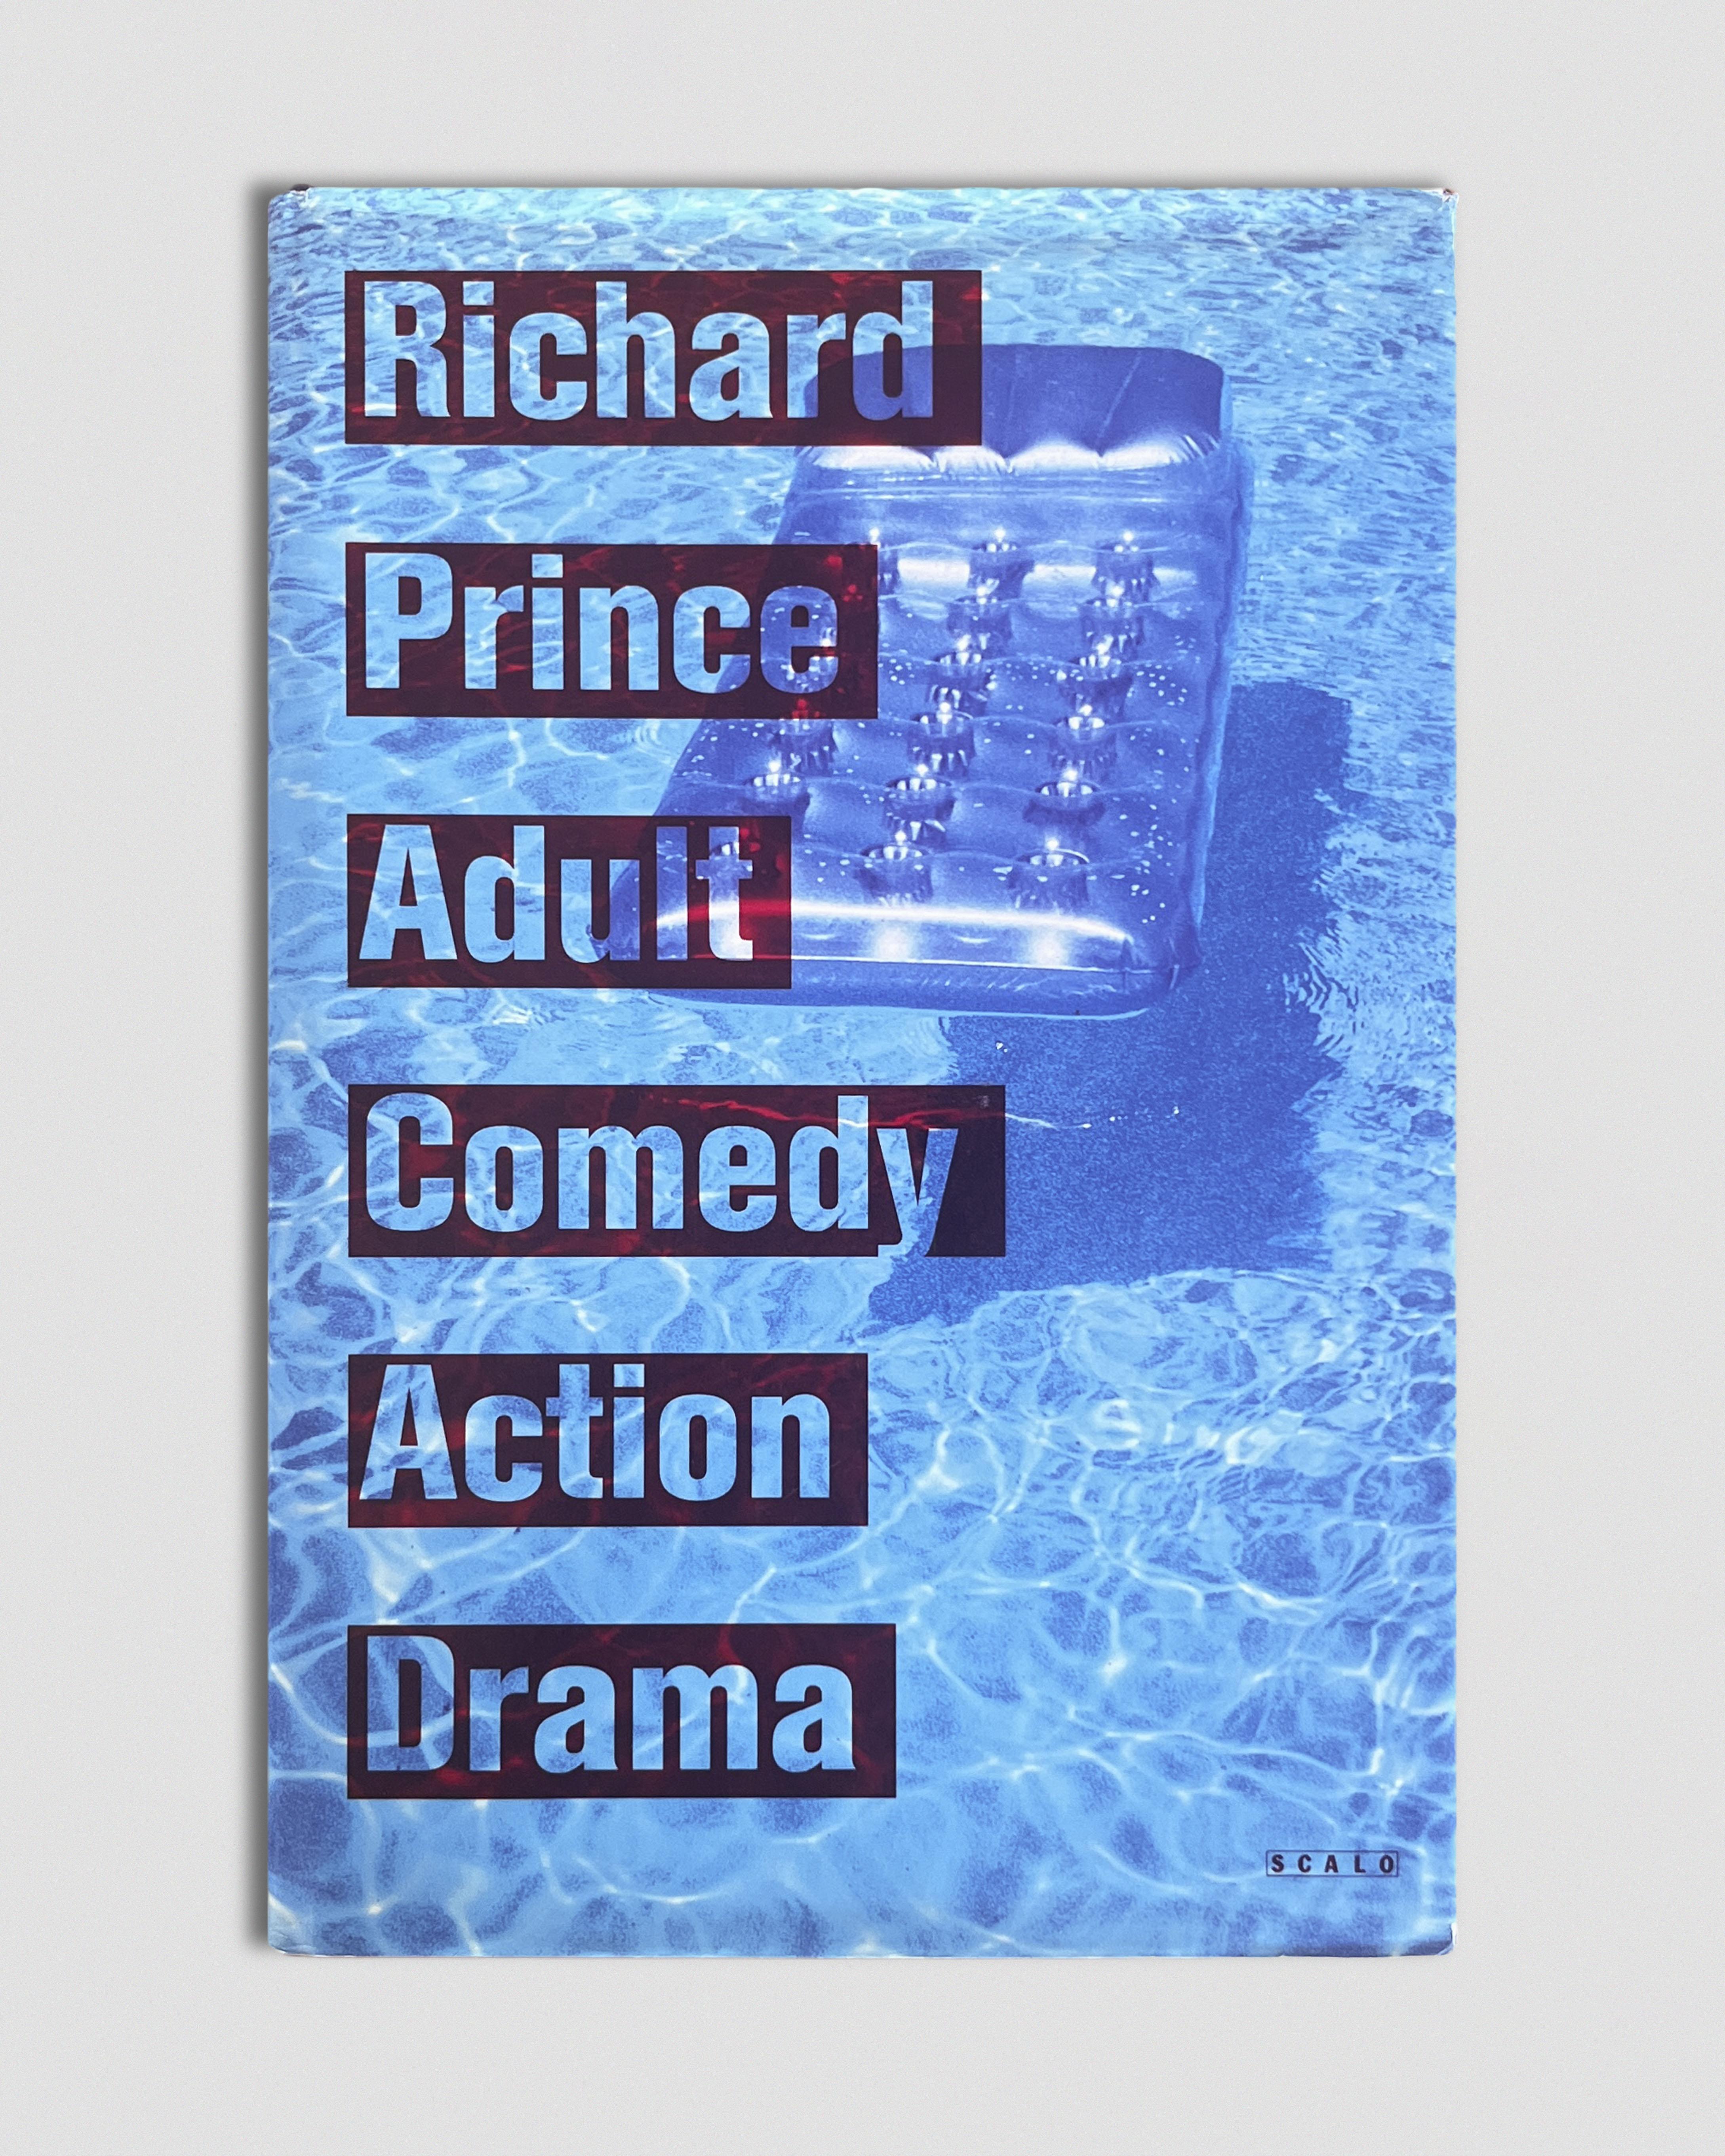 Adult Comedy Action Drama - Richard Prince ($225) - In Form Library